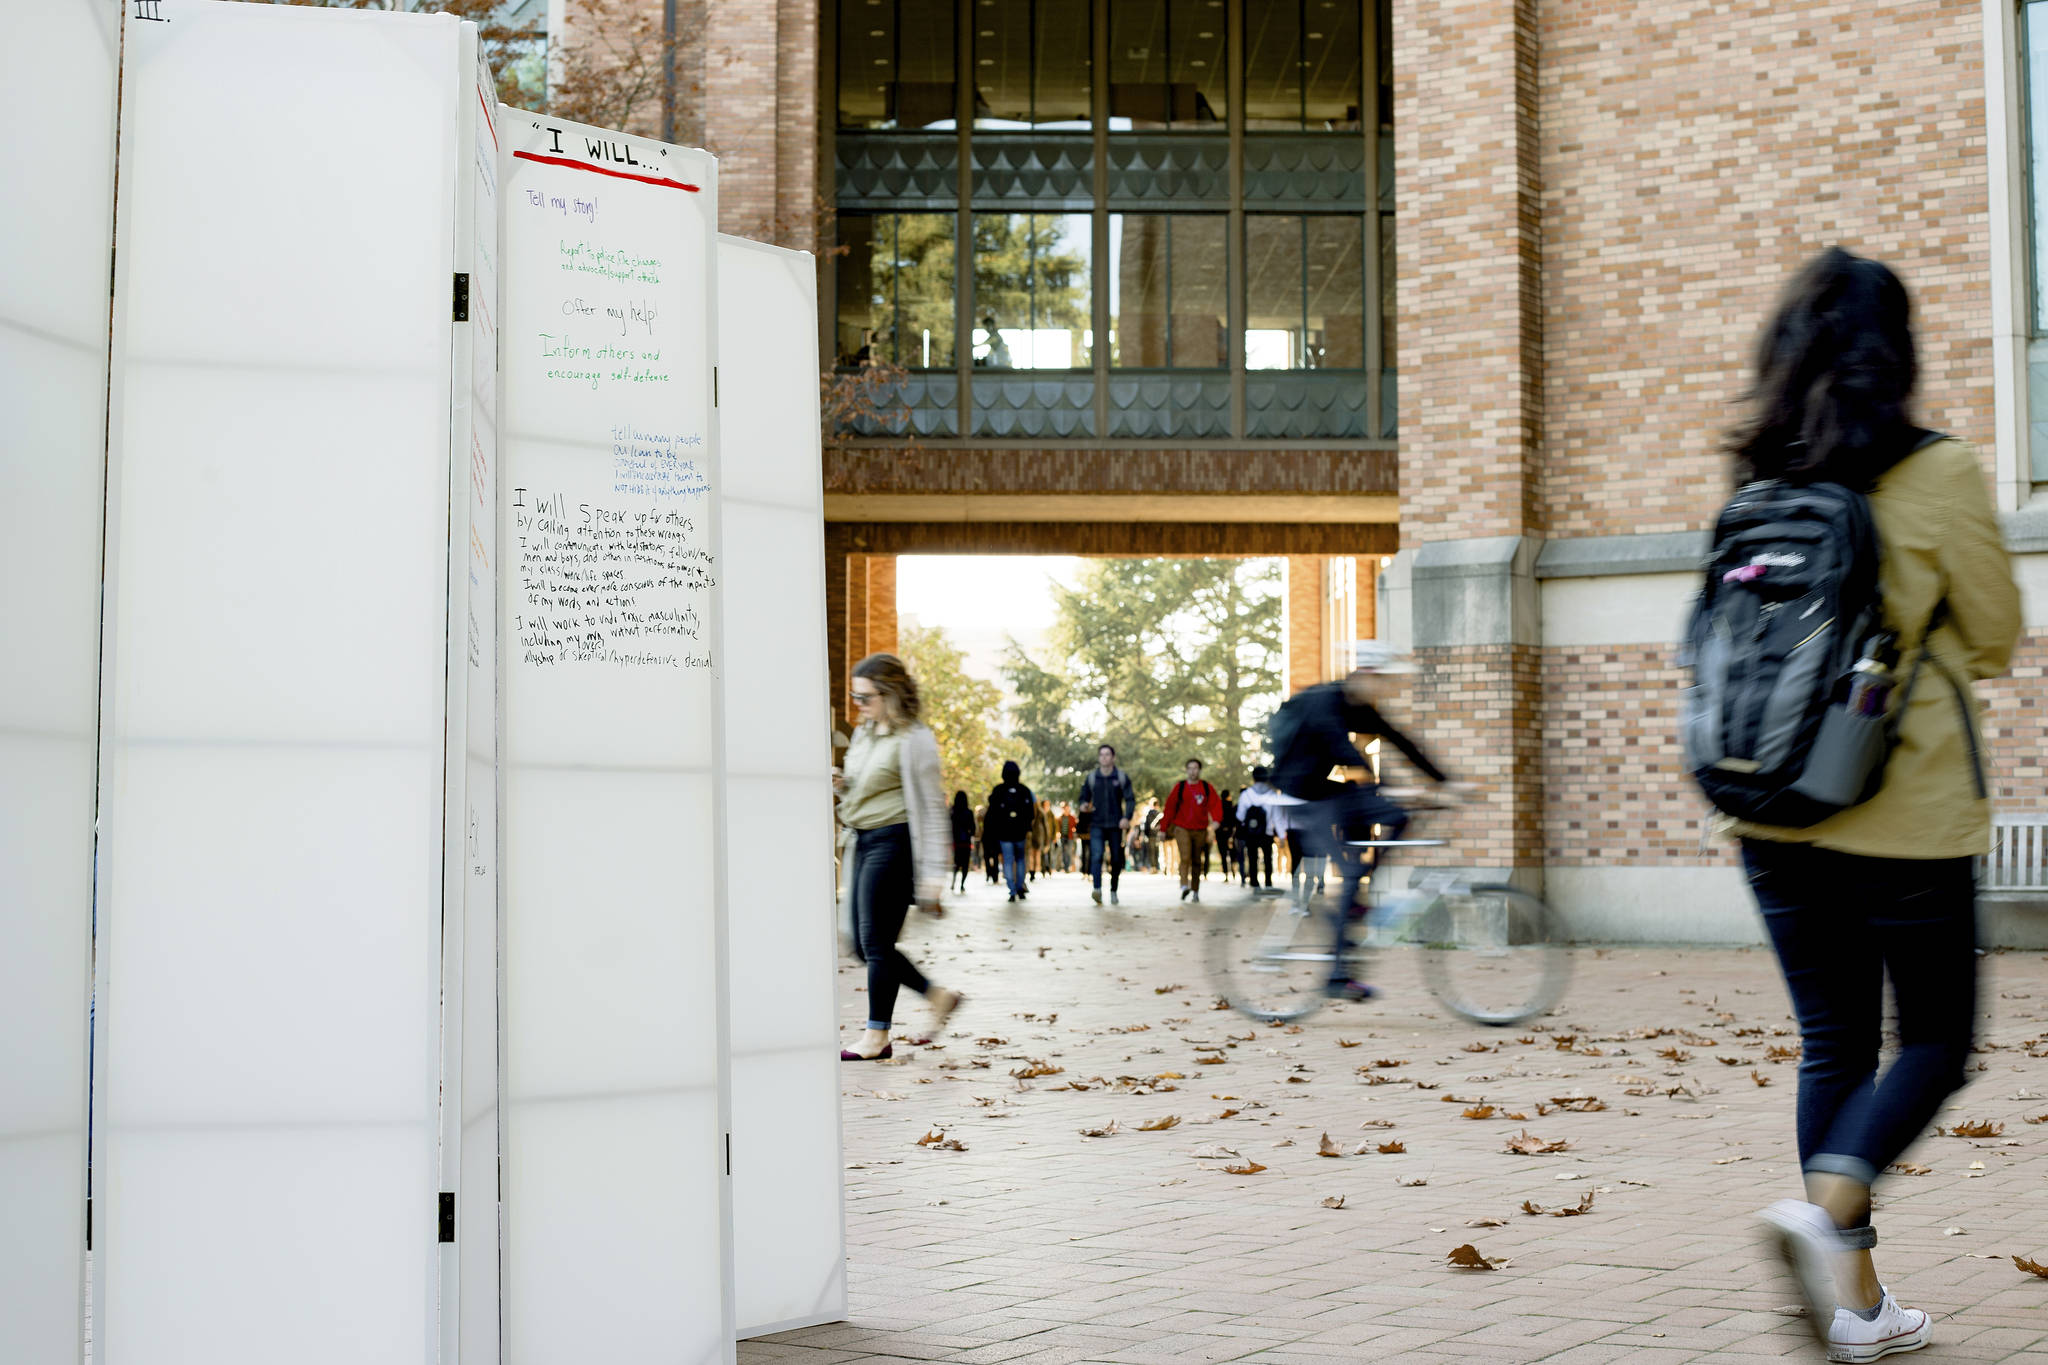 Charlie Shih’s interactive art installation ‘&lt;em&gt;They Did’&lt;/em&gt; captured the spirit of #MeToo on UW’s campus. Photo by Lucas Boland